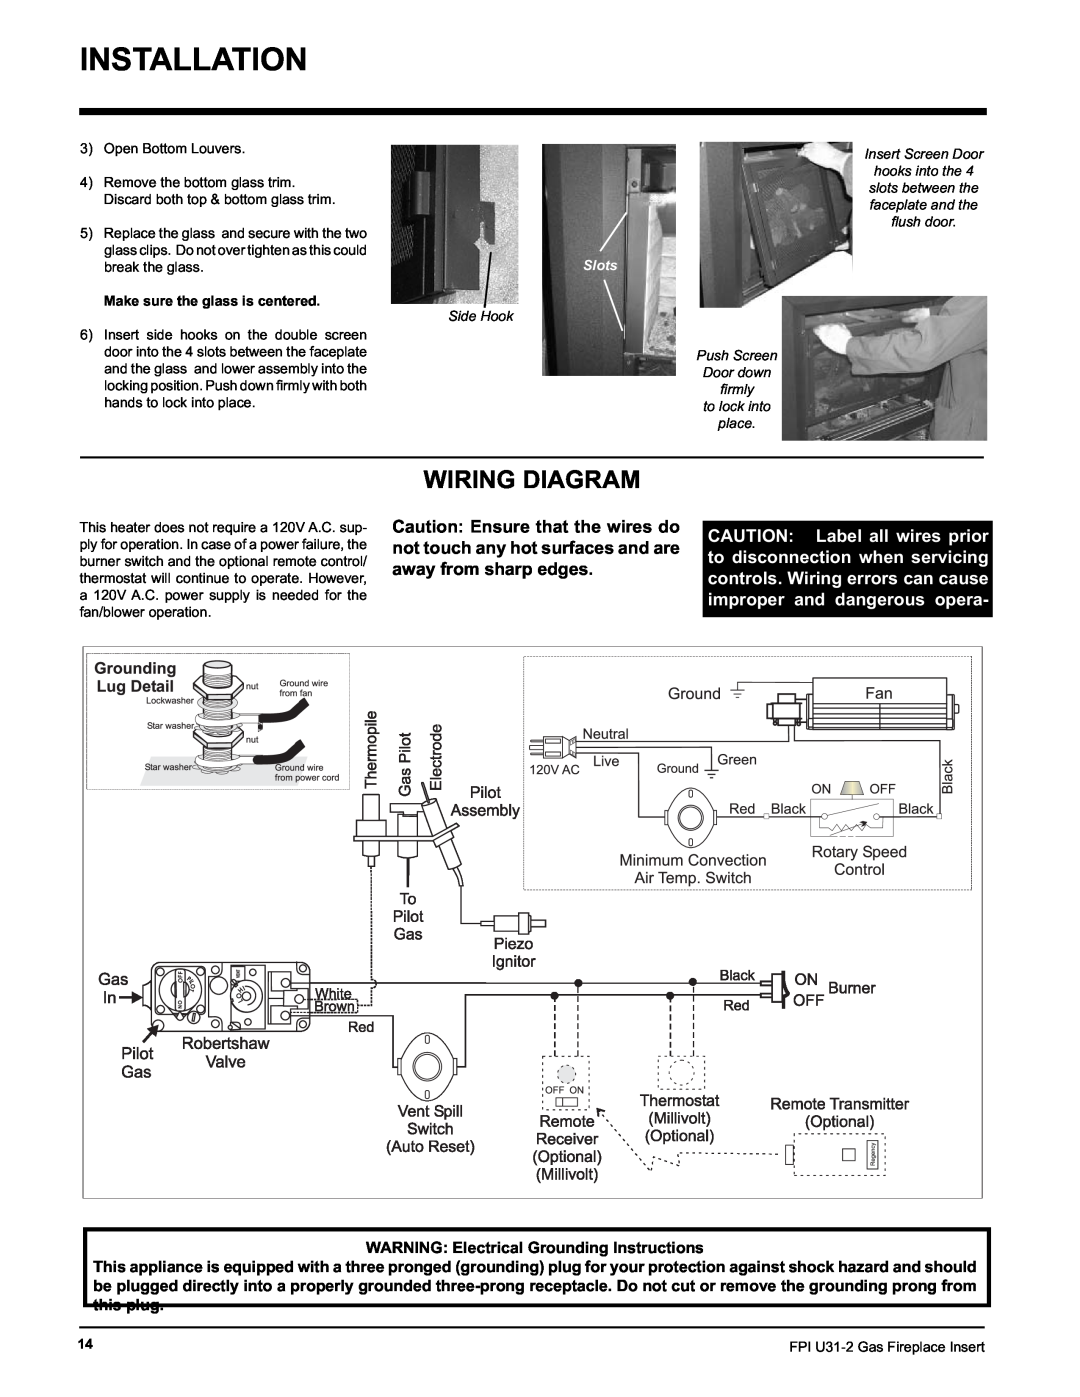 Recoton/Advent U31-NG2 Installation, Wiring Diagram, Side Hook, Push Screen Door down ﬁrmly to lock into place, Slots 